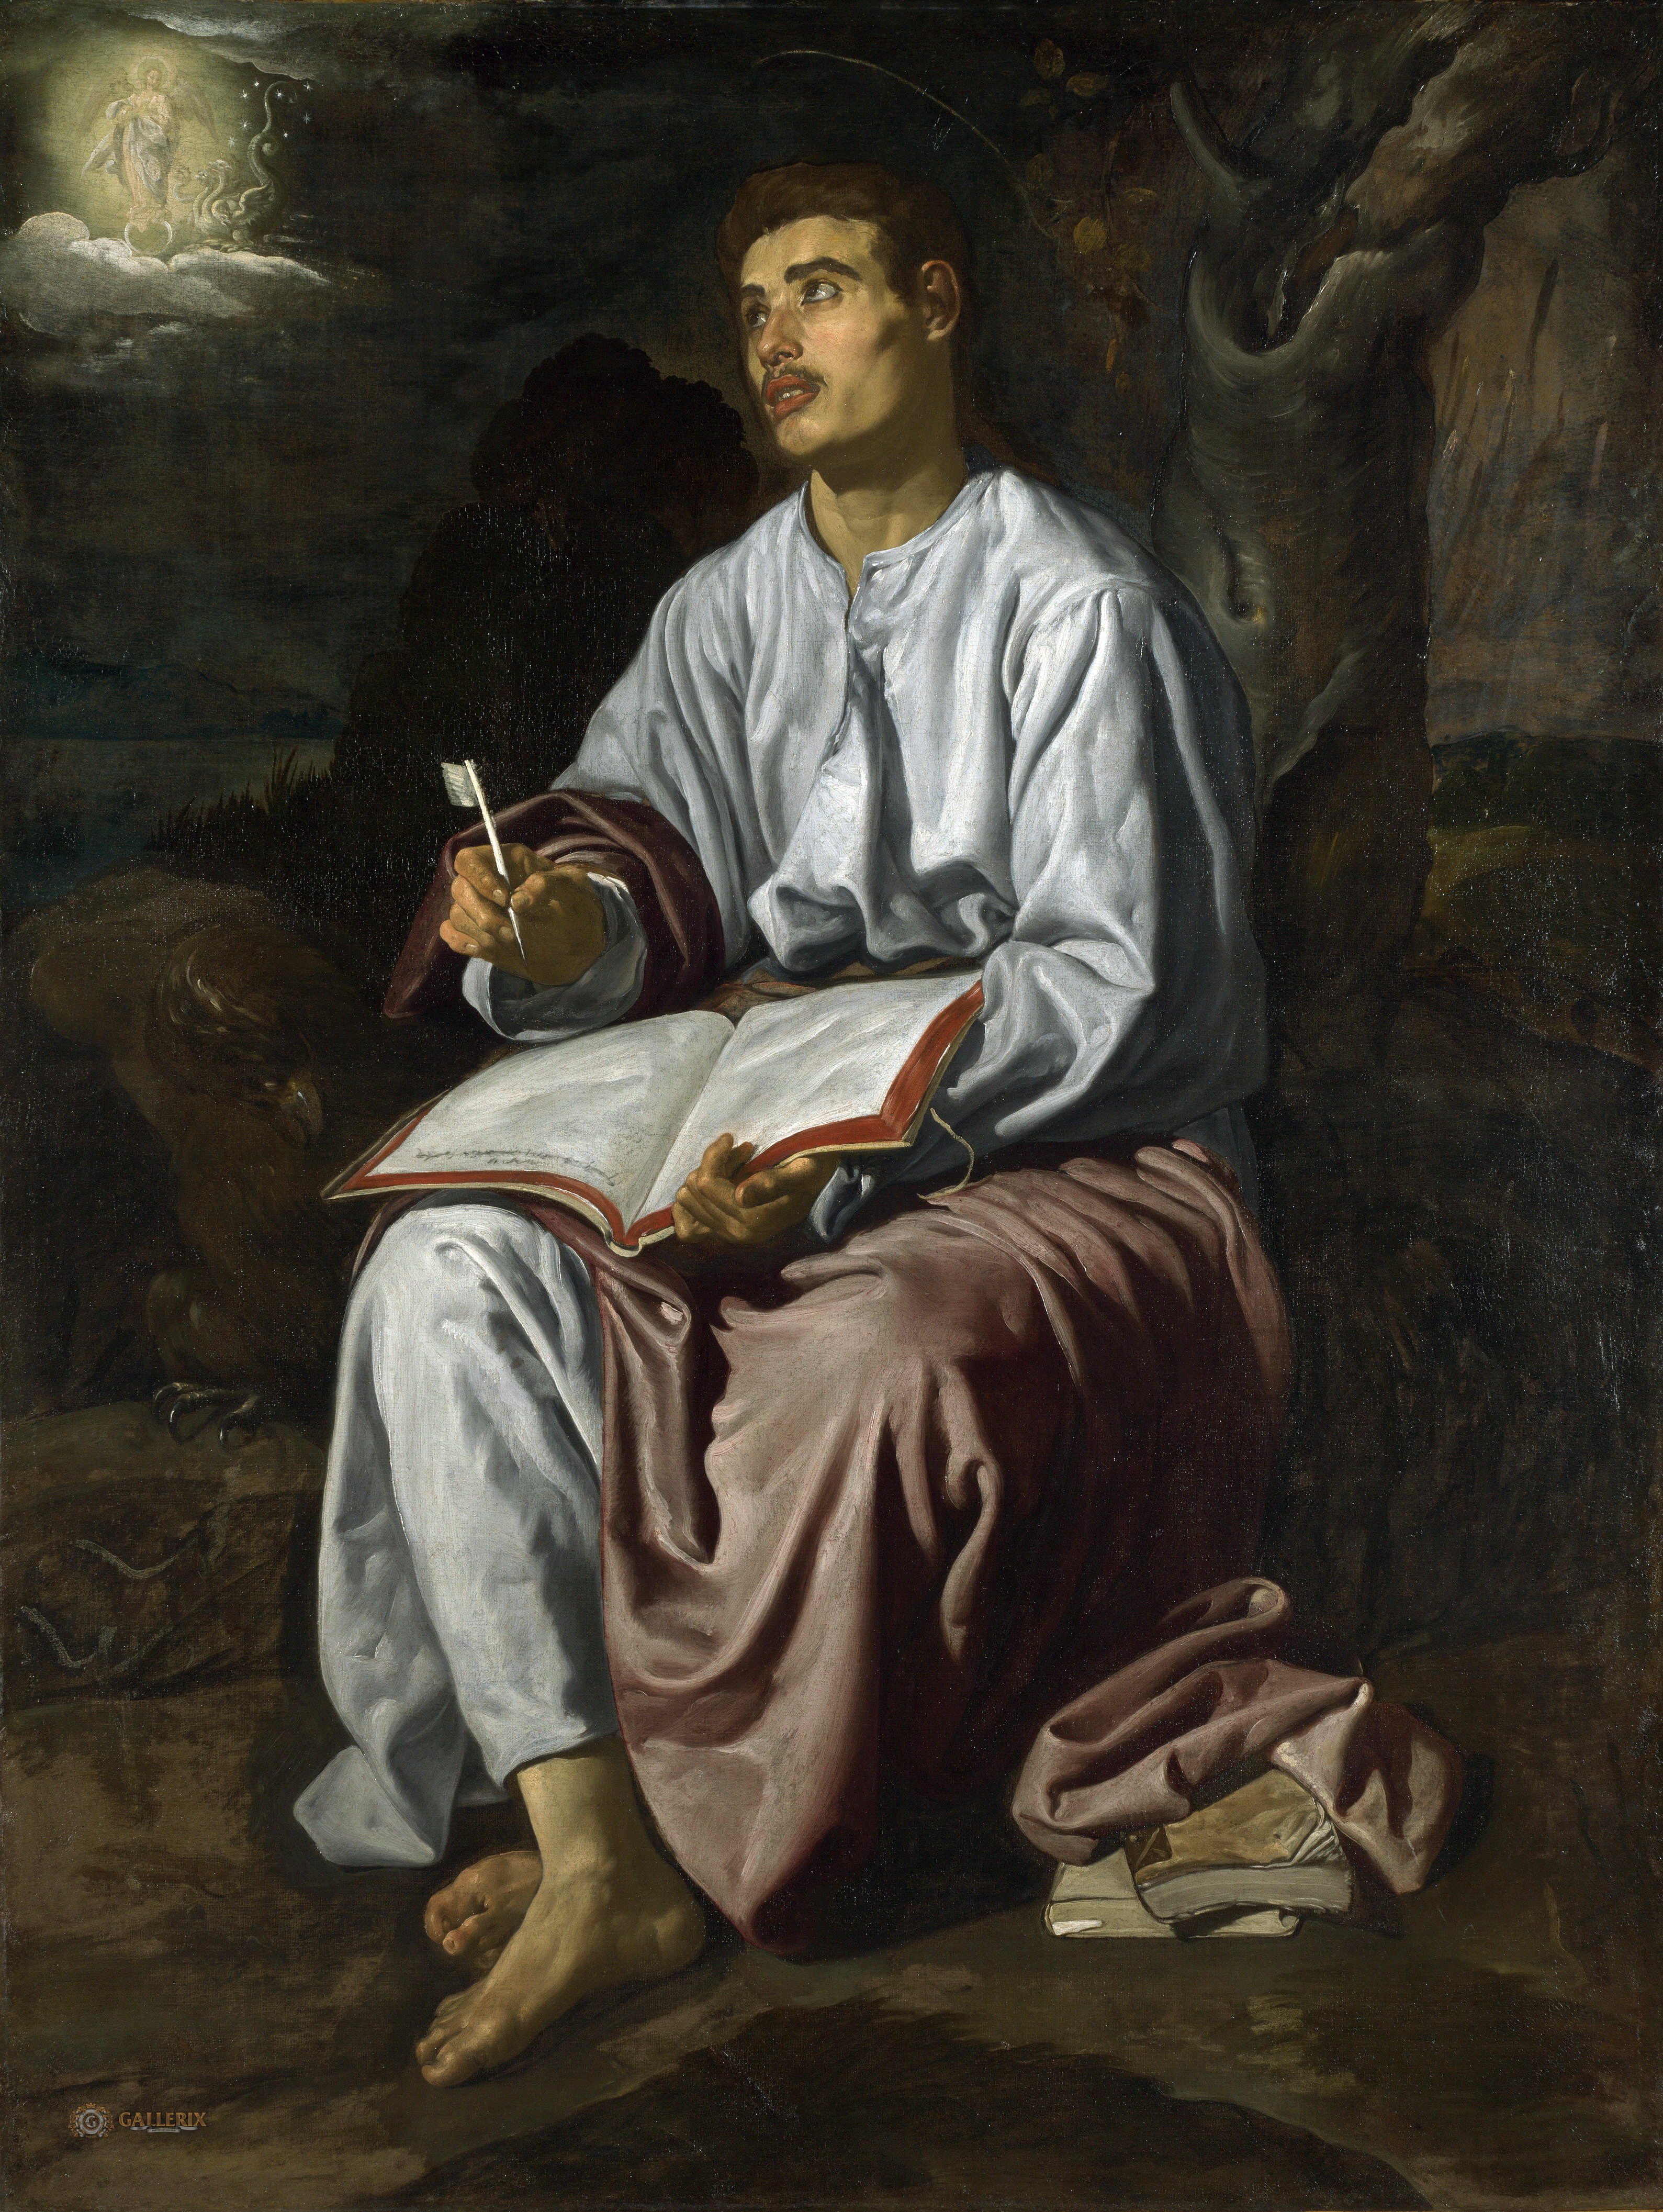 Diego Velazquez, St John the Evangelist on the Island of Patmos, 1617, The National Gallery, London, UK.